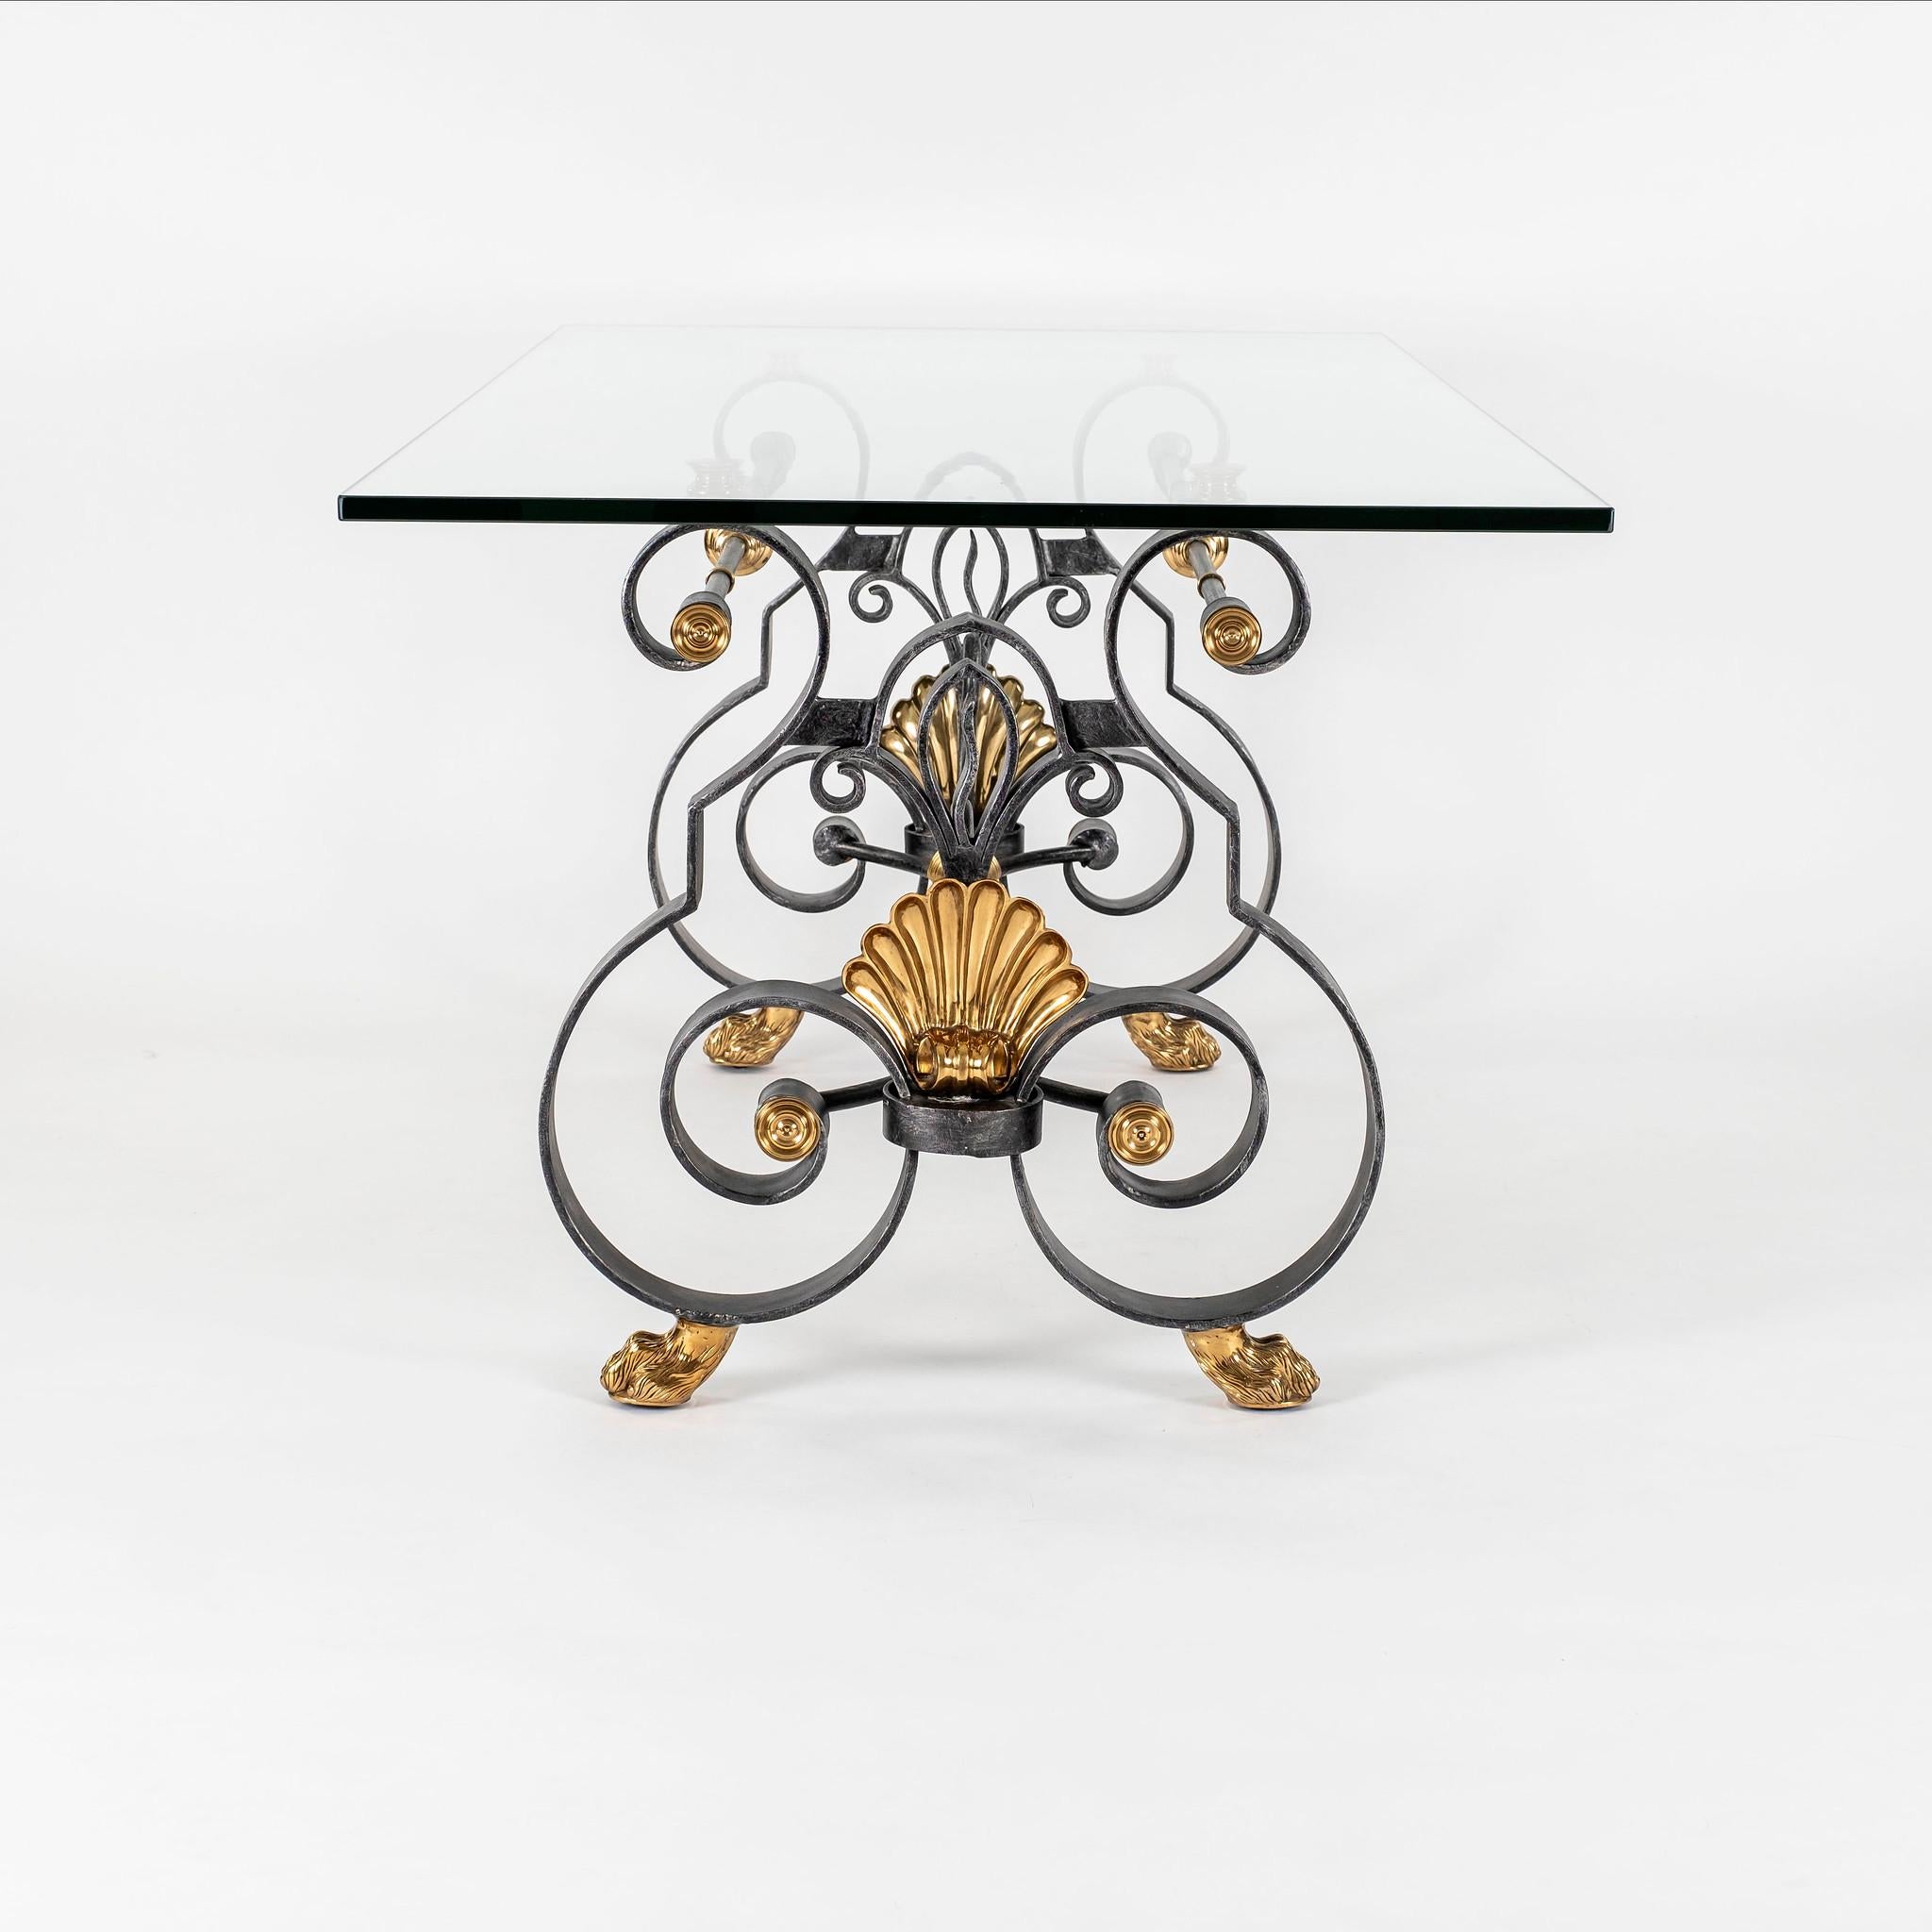 Vintage Louis XV style brass, iron and glass dining table. Heavy base is made of thick scrolled flat iron detailed with polished brass medallions, shell cartouches and lion's feet.